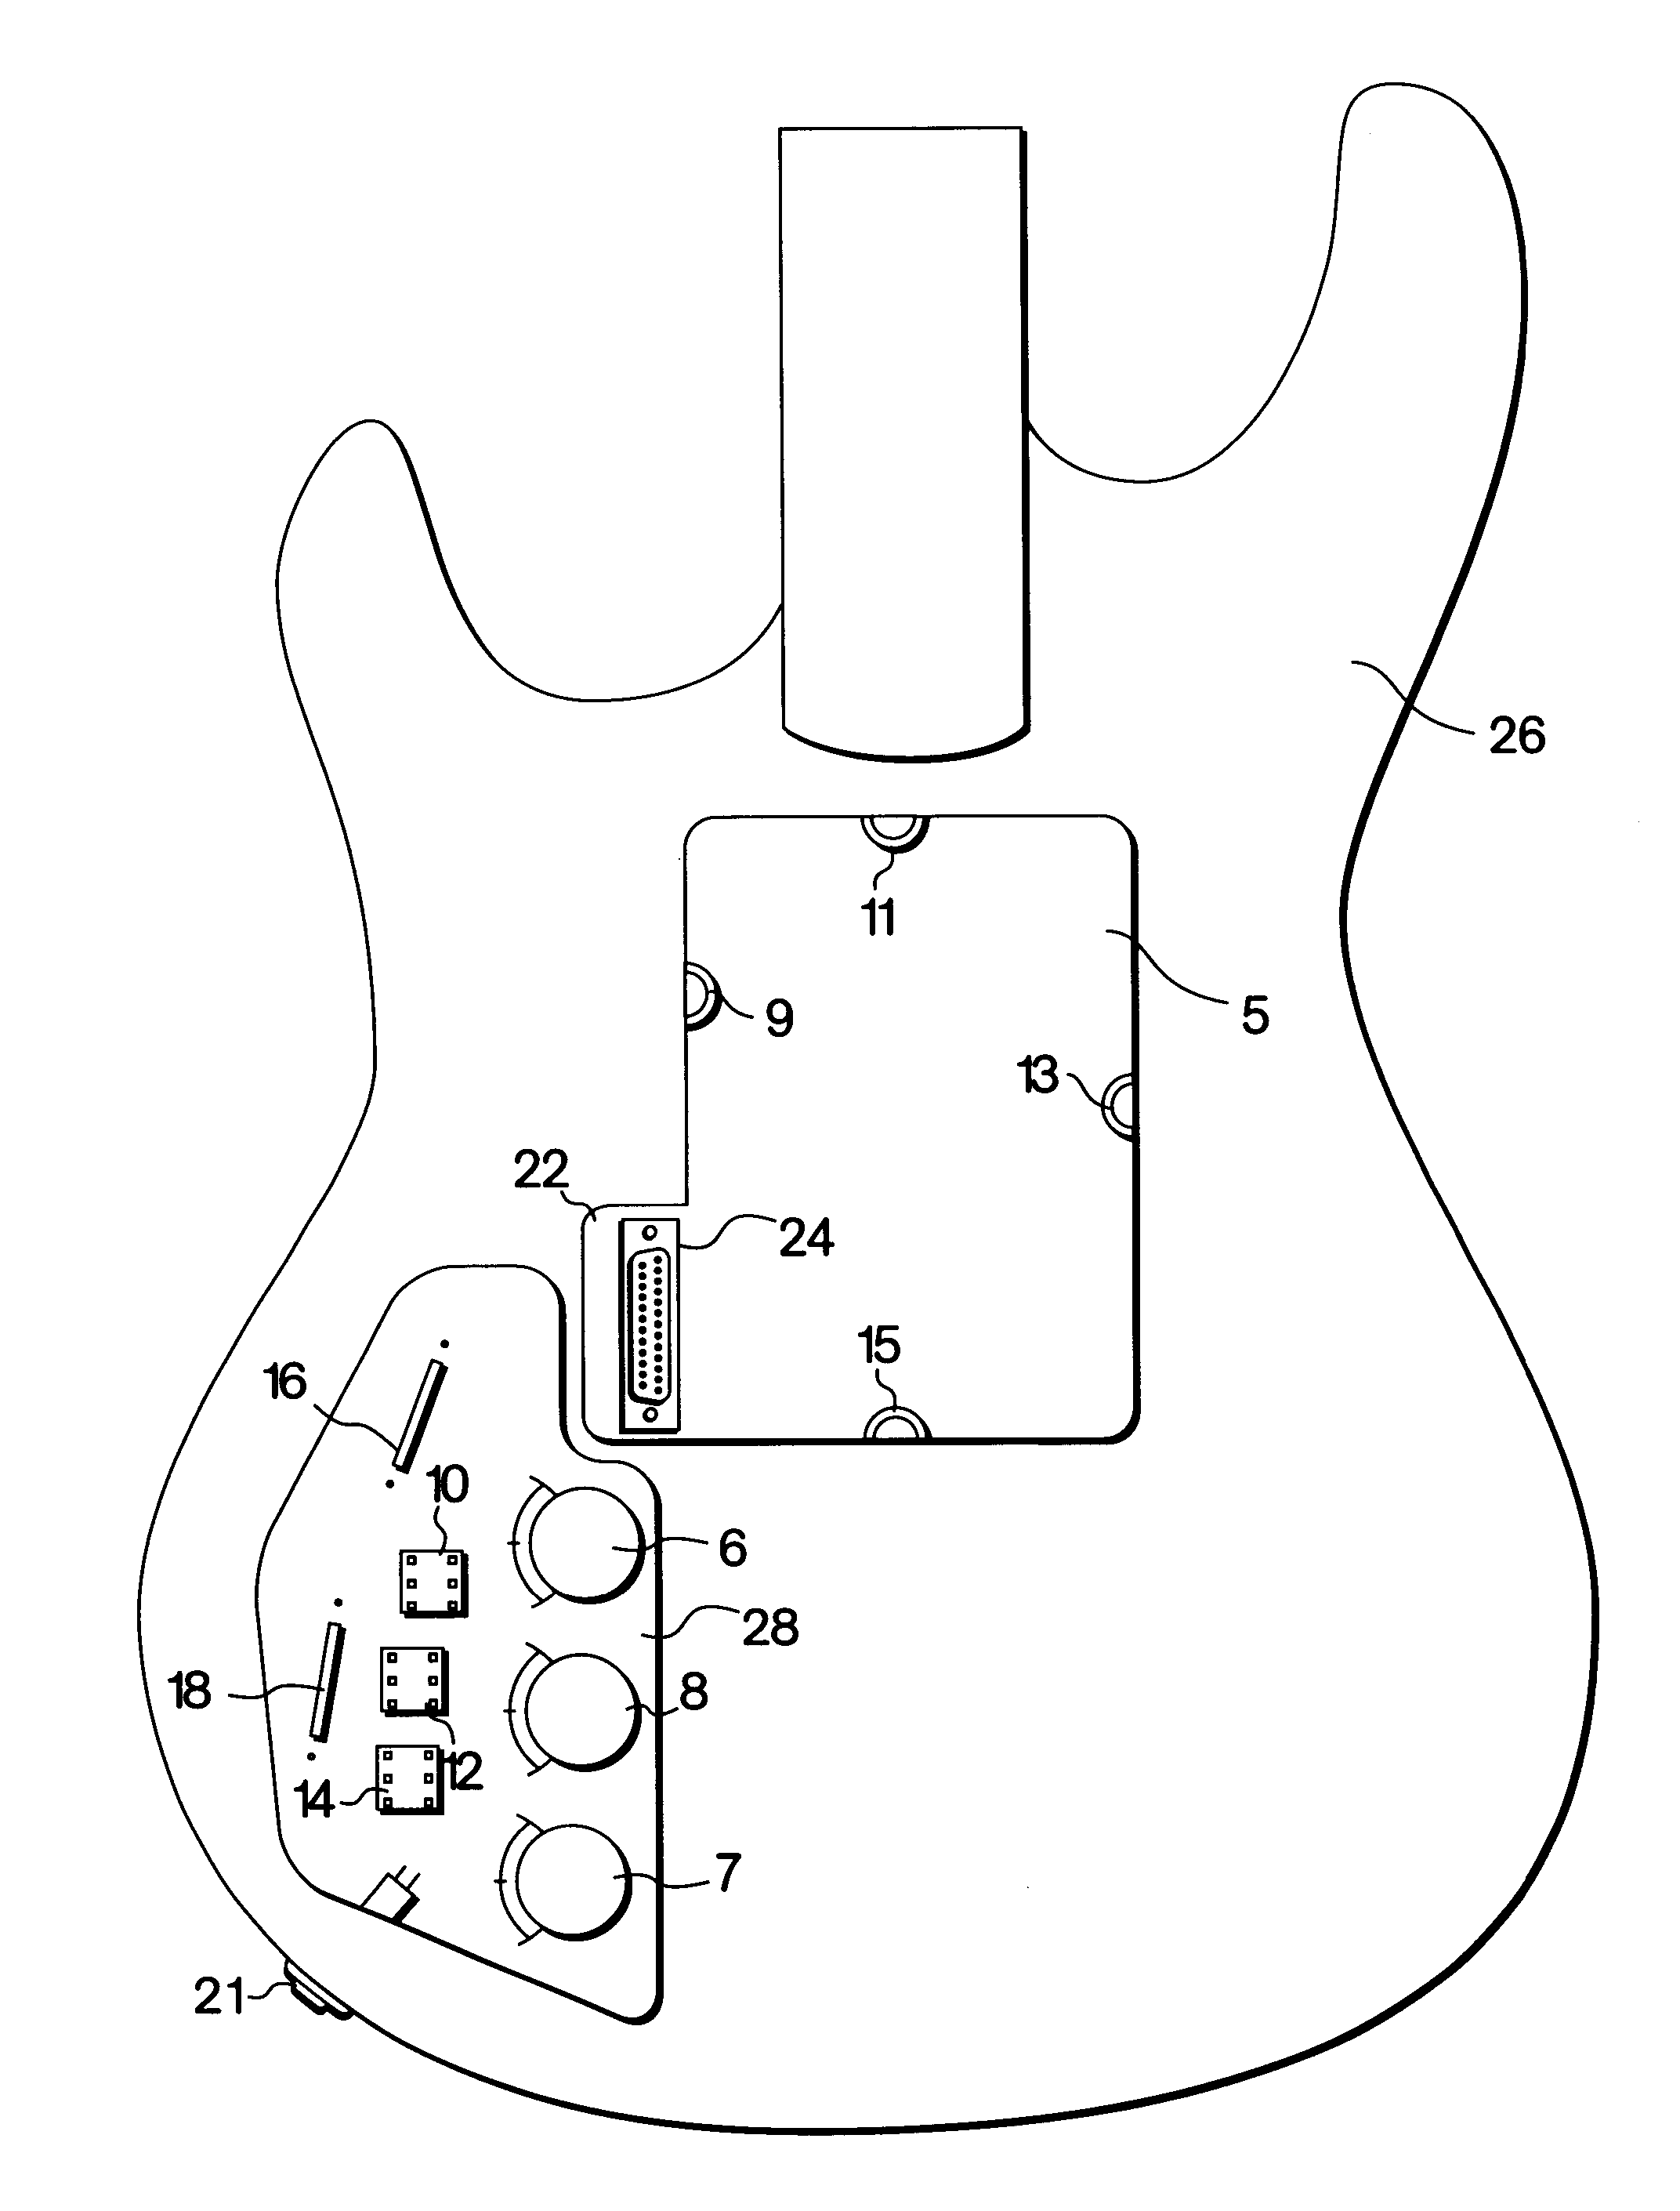 Electric stringed instrument with interchangeable pickup assemblies which connect to electronic components fixed within the guitar body